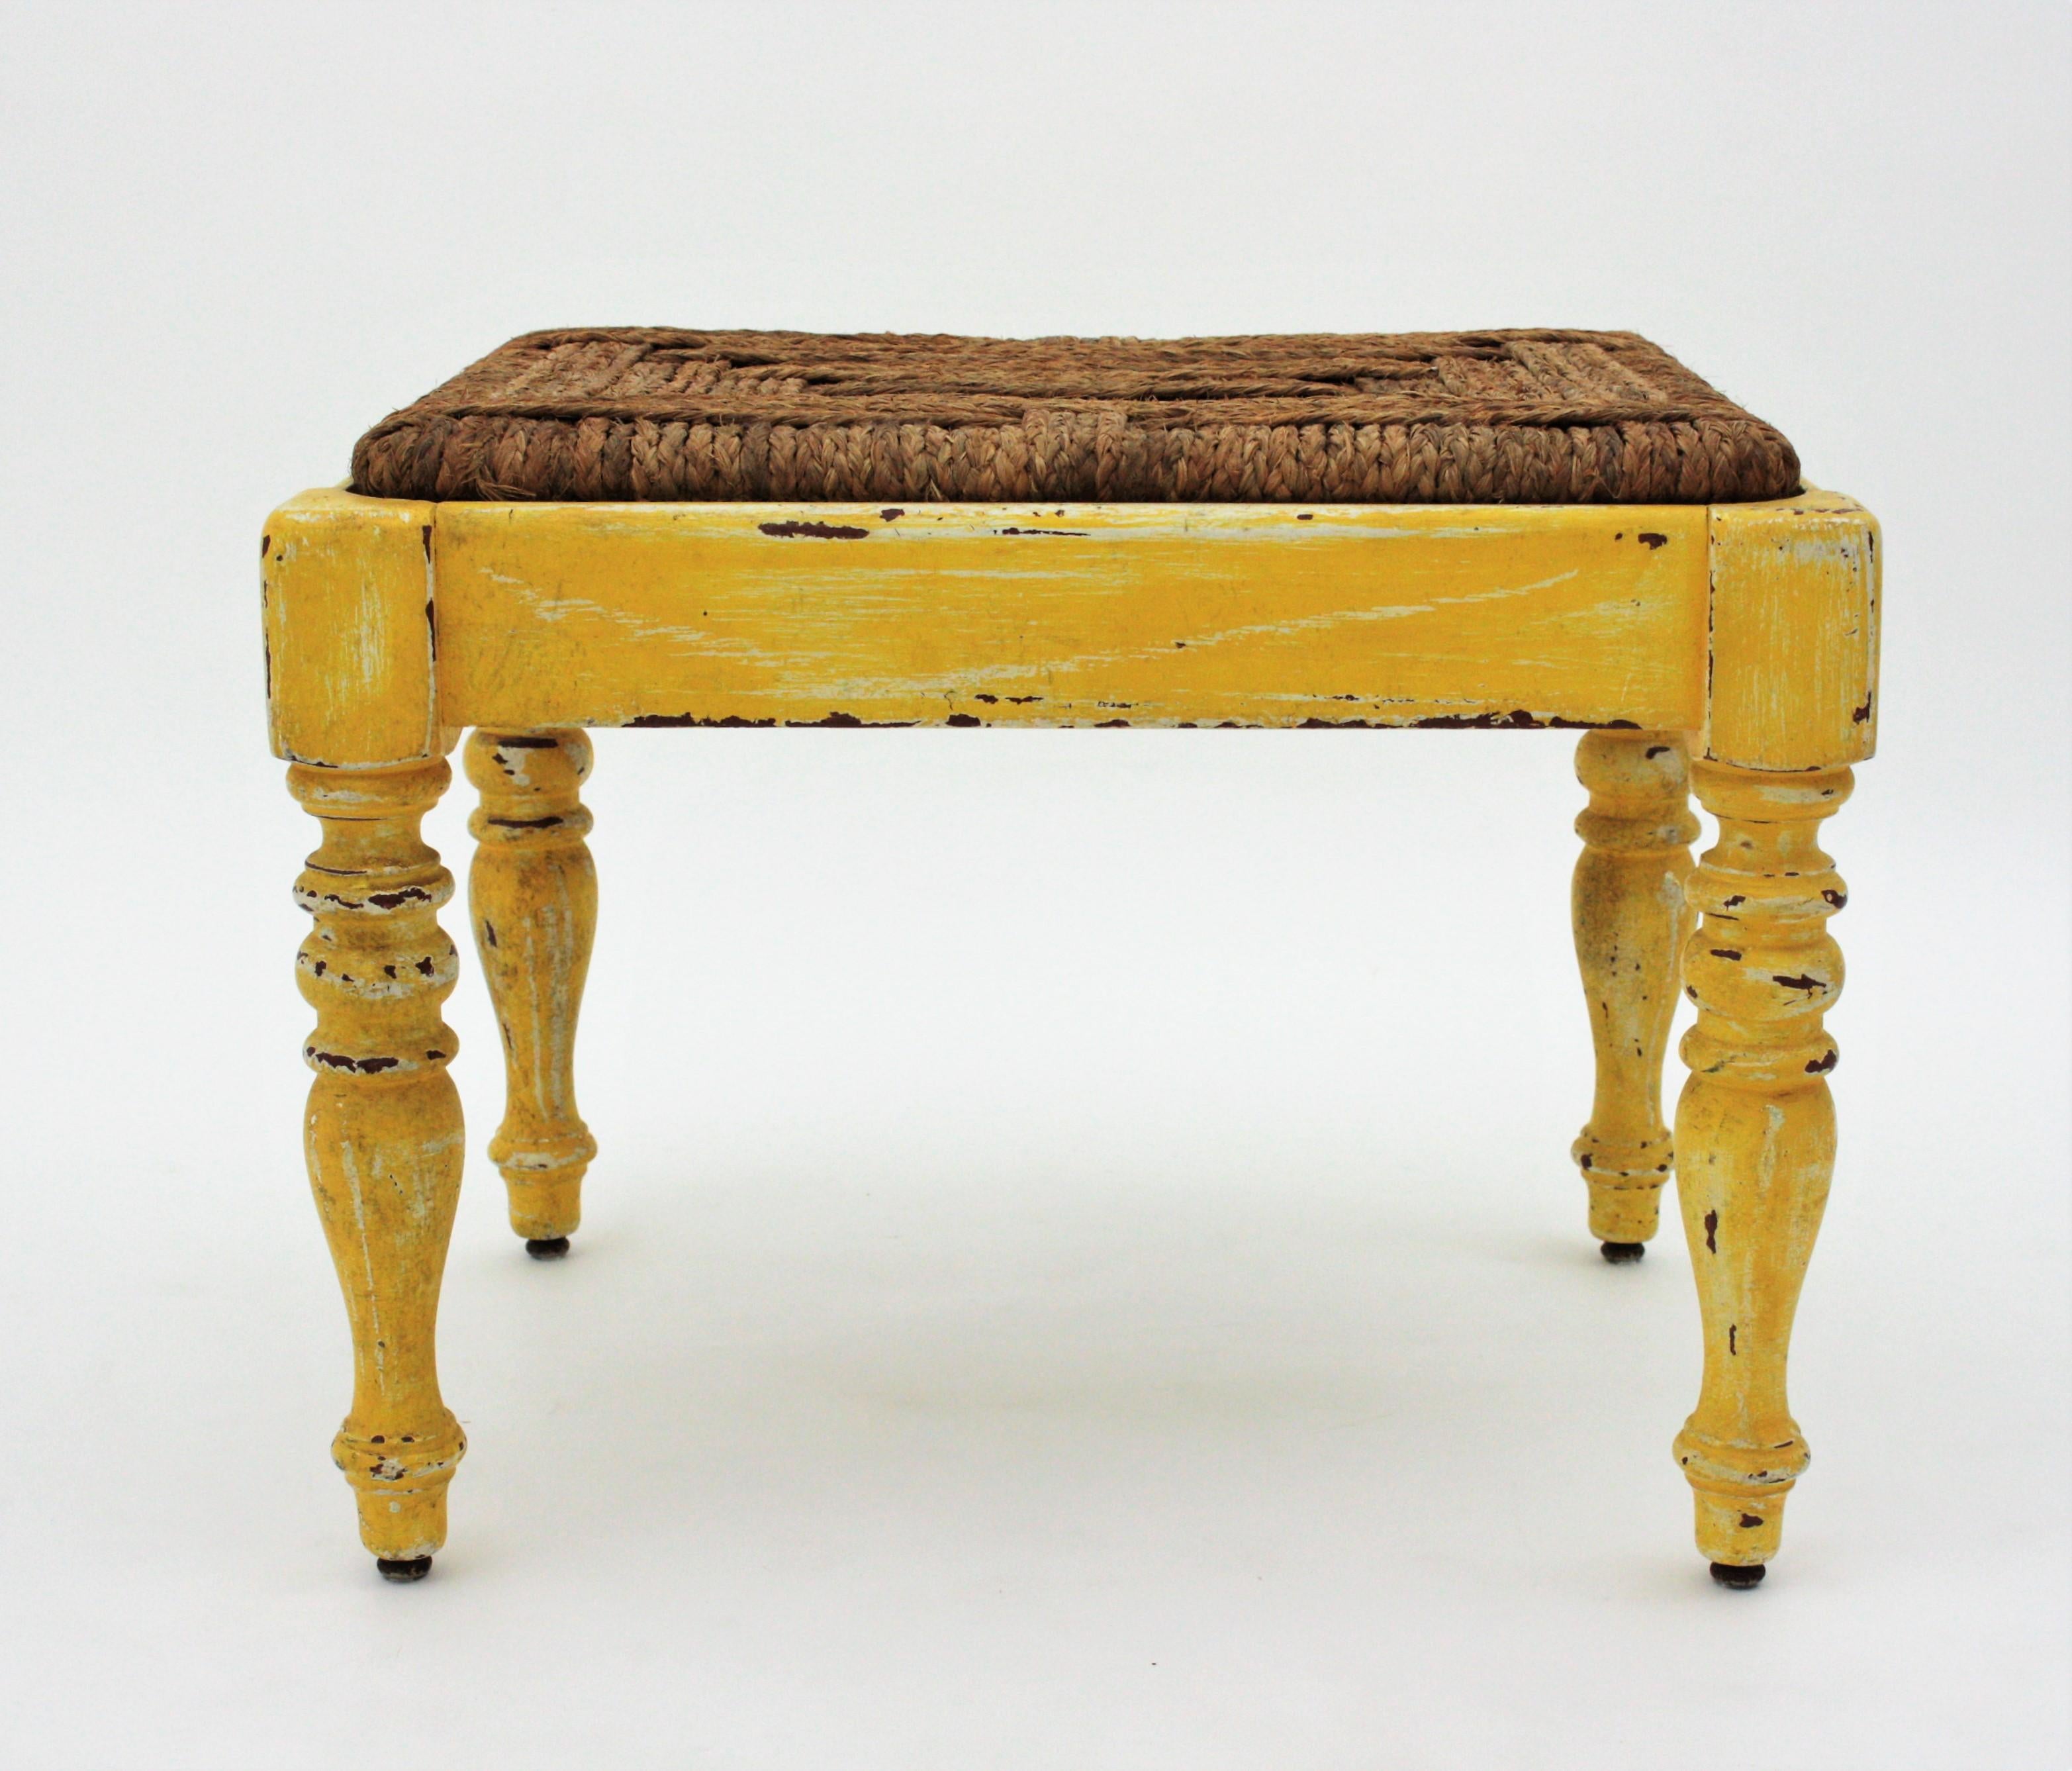 French Rustic Stool with Esparto Grass Seat and Yellow Patina For Sale 2